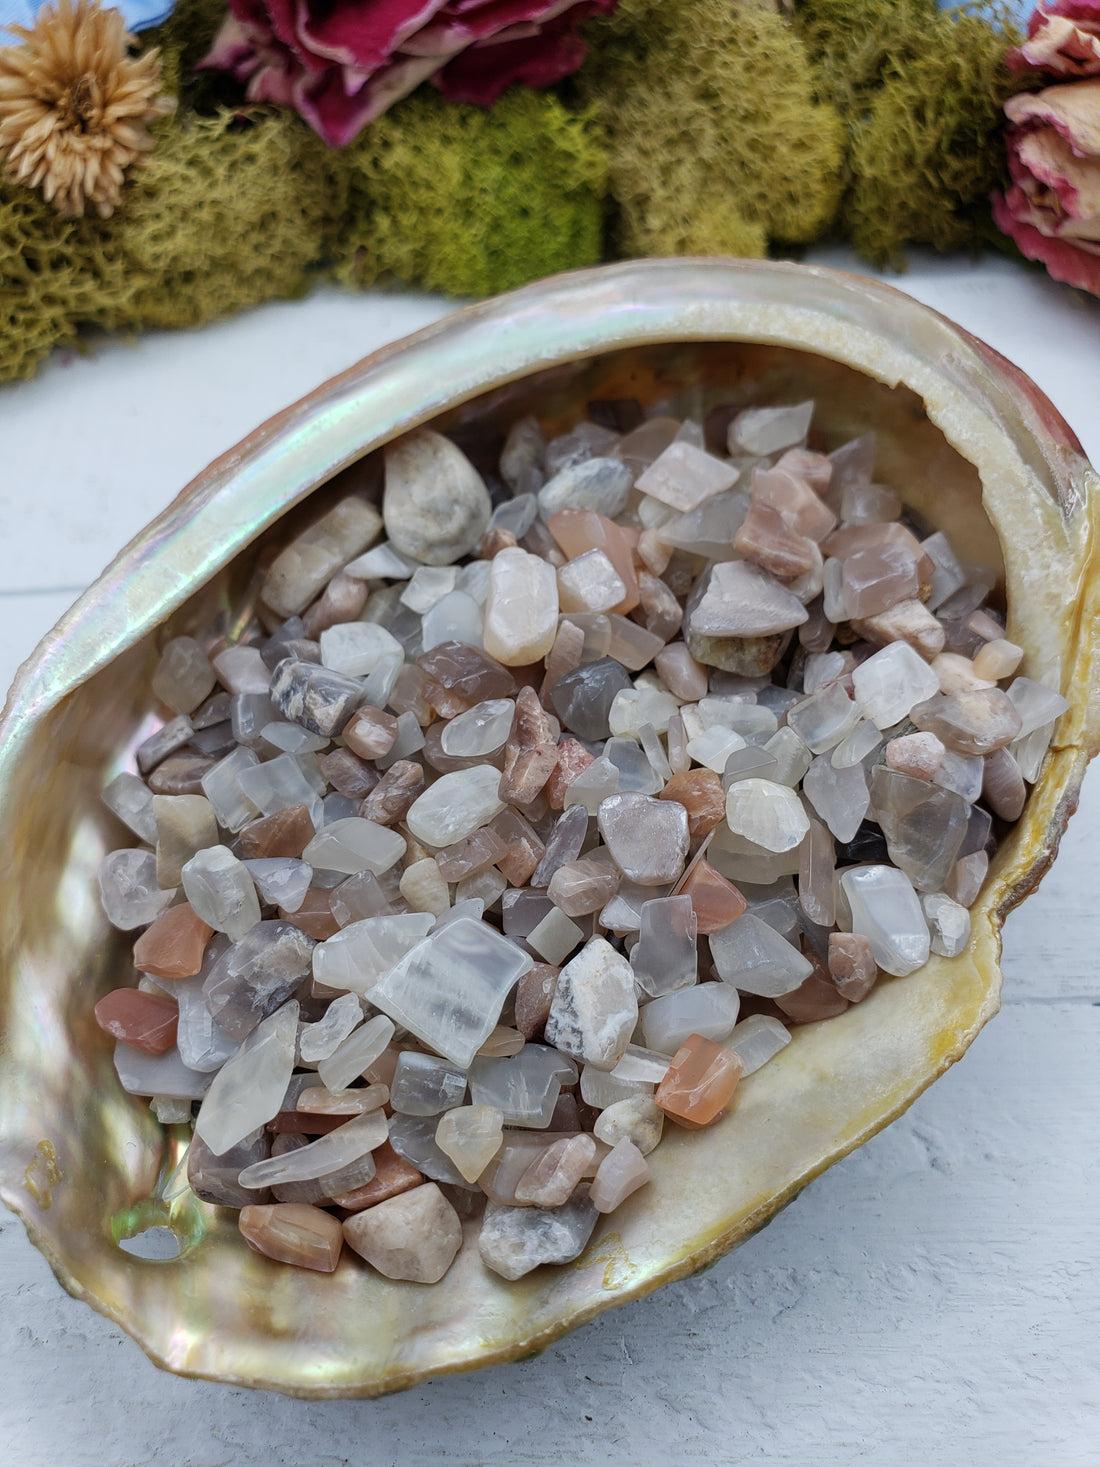 Three ounces of moonstone crystal chips in abalone shell